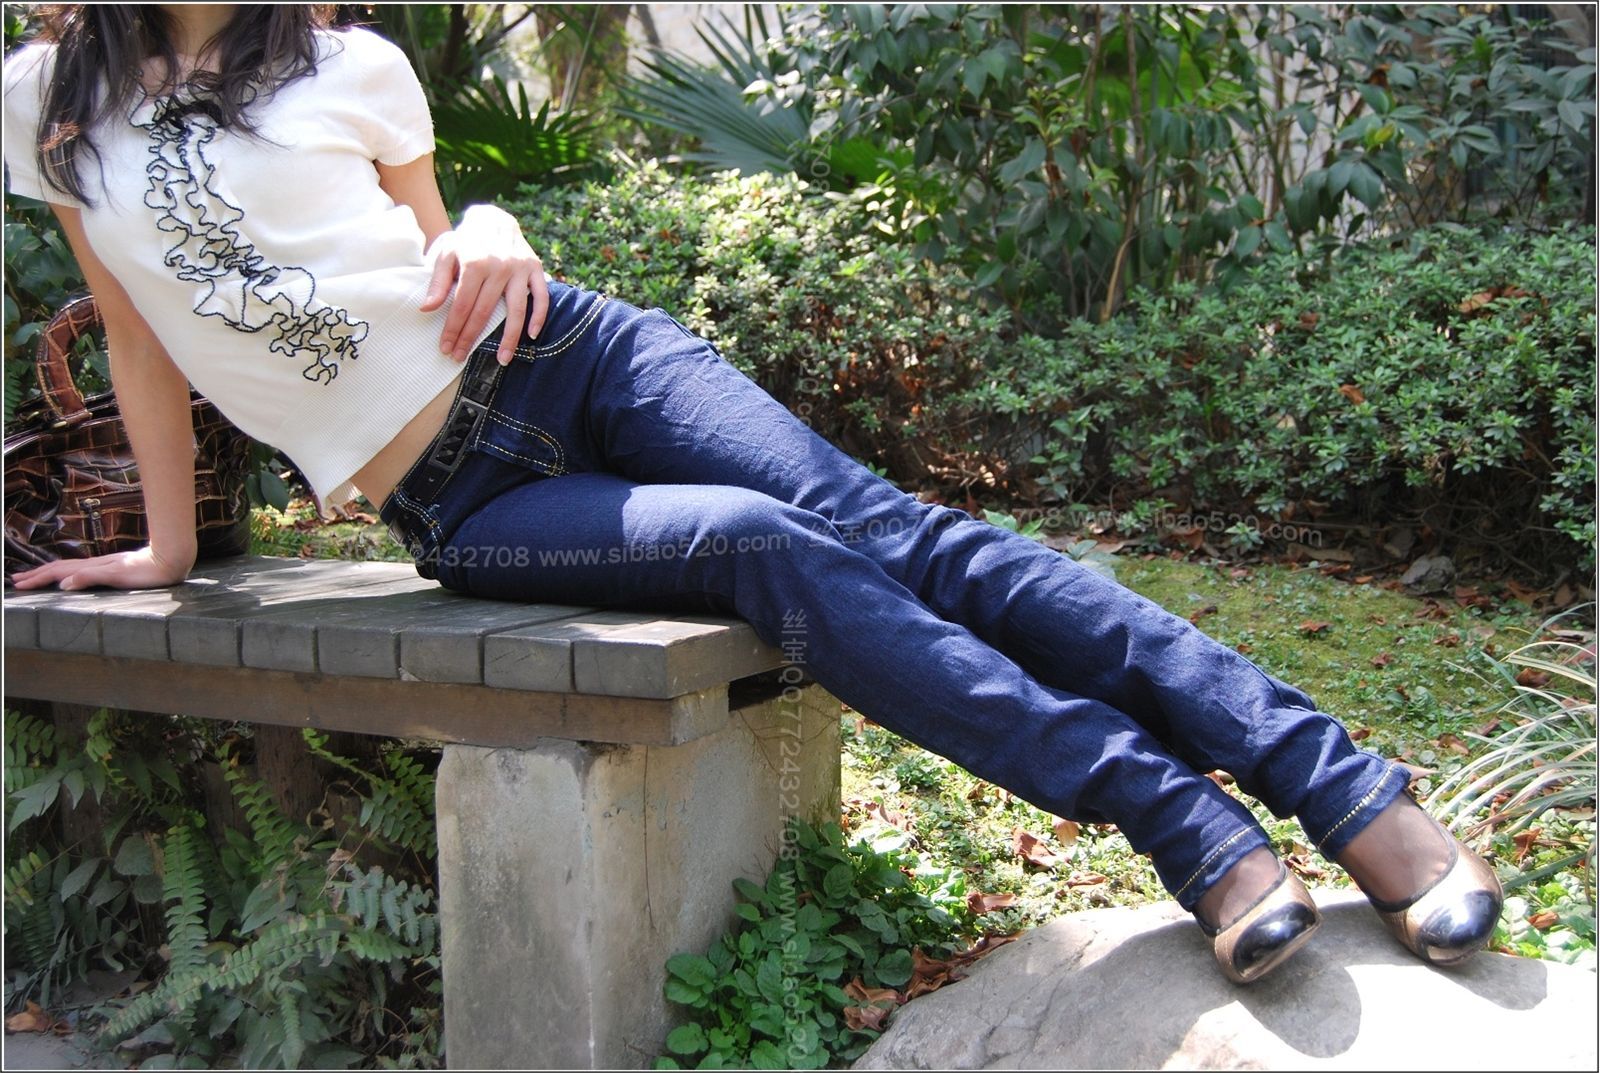 [Sibao] 2009.03.25 jeans in spring